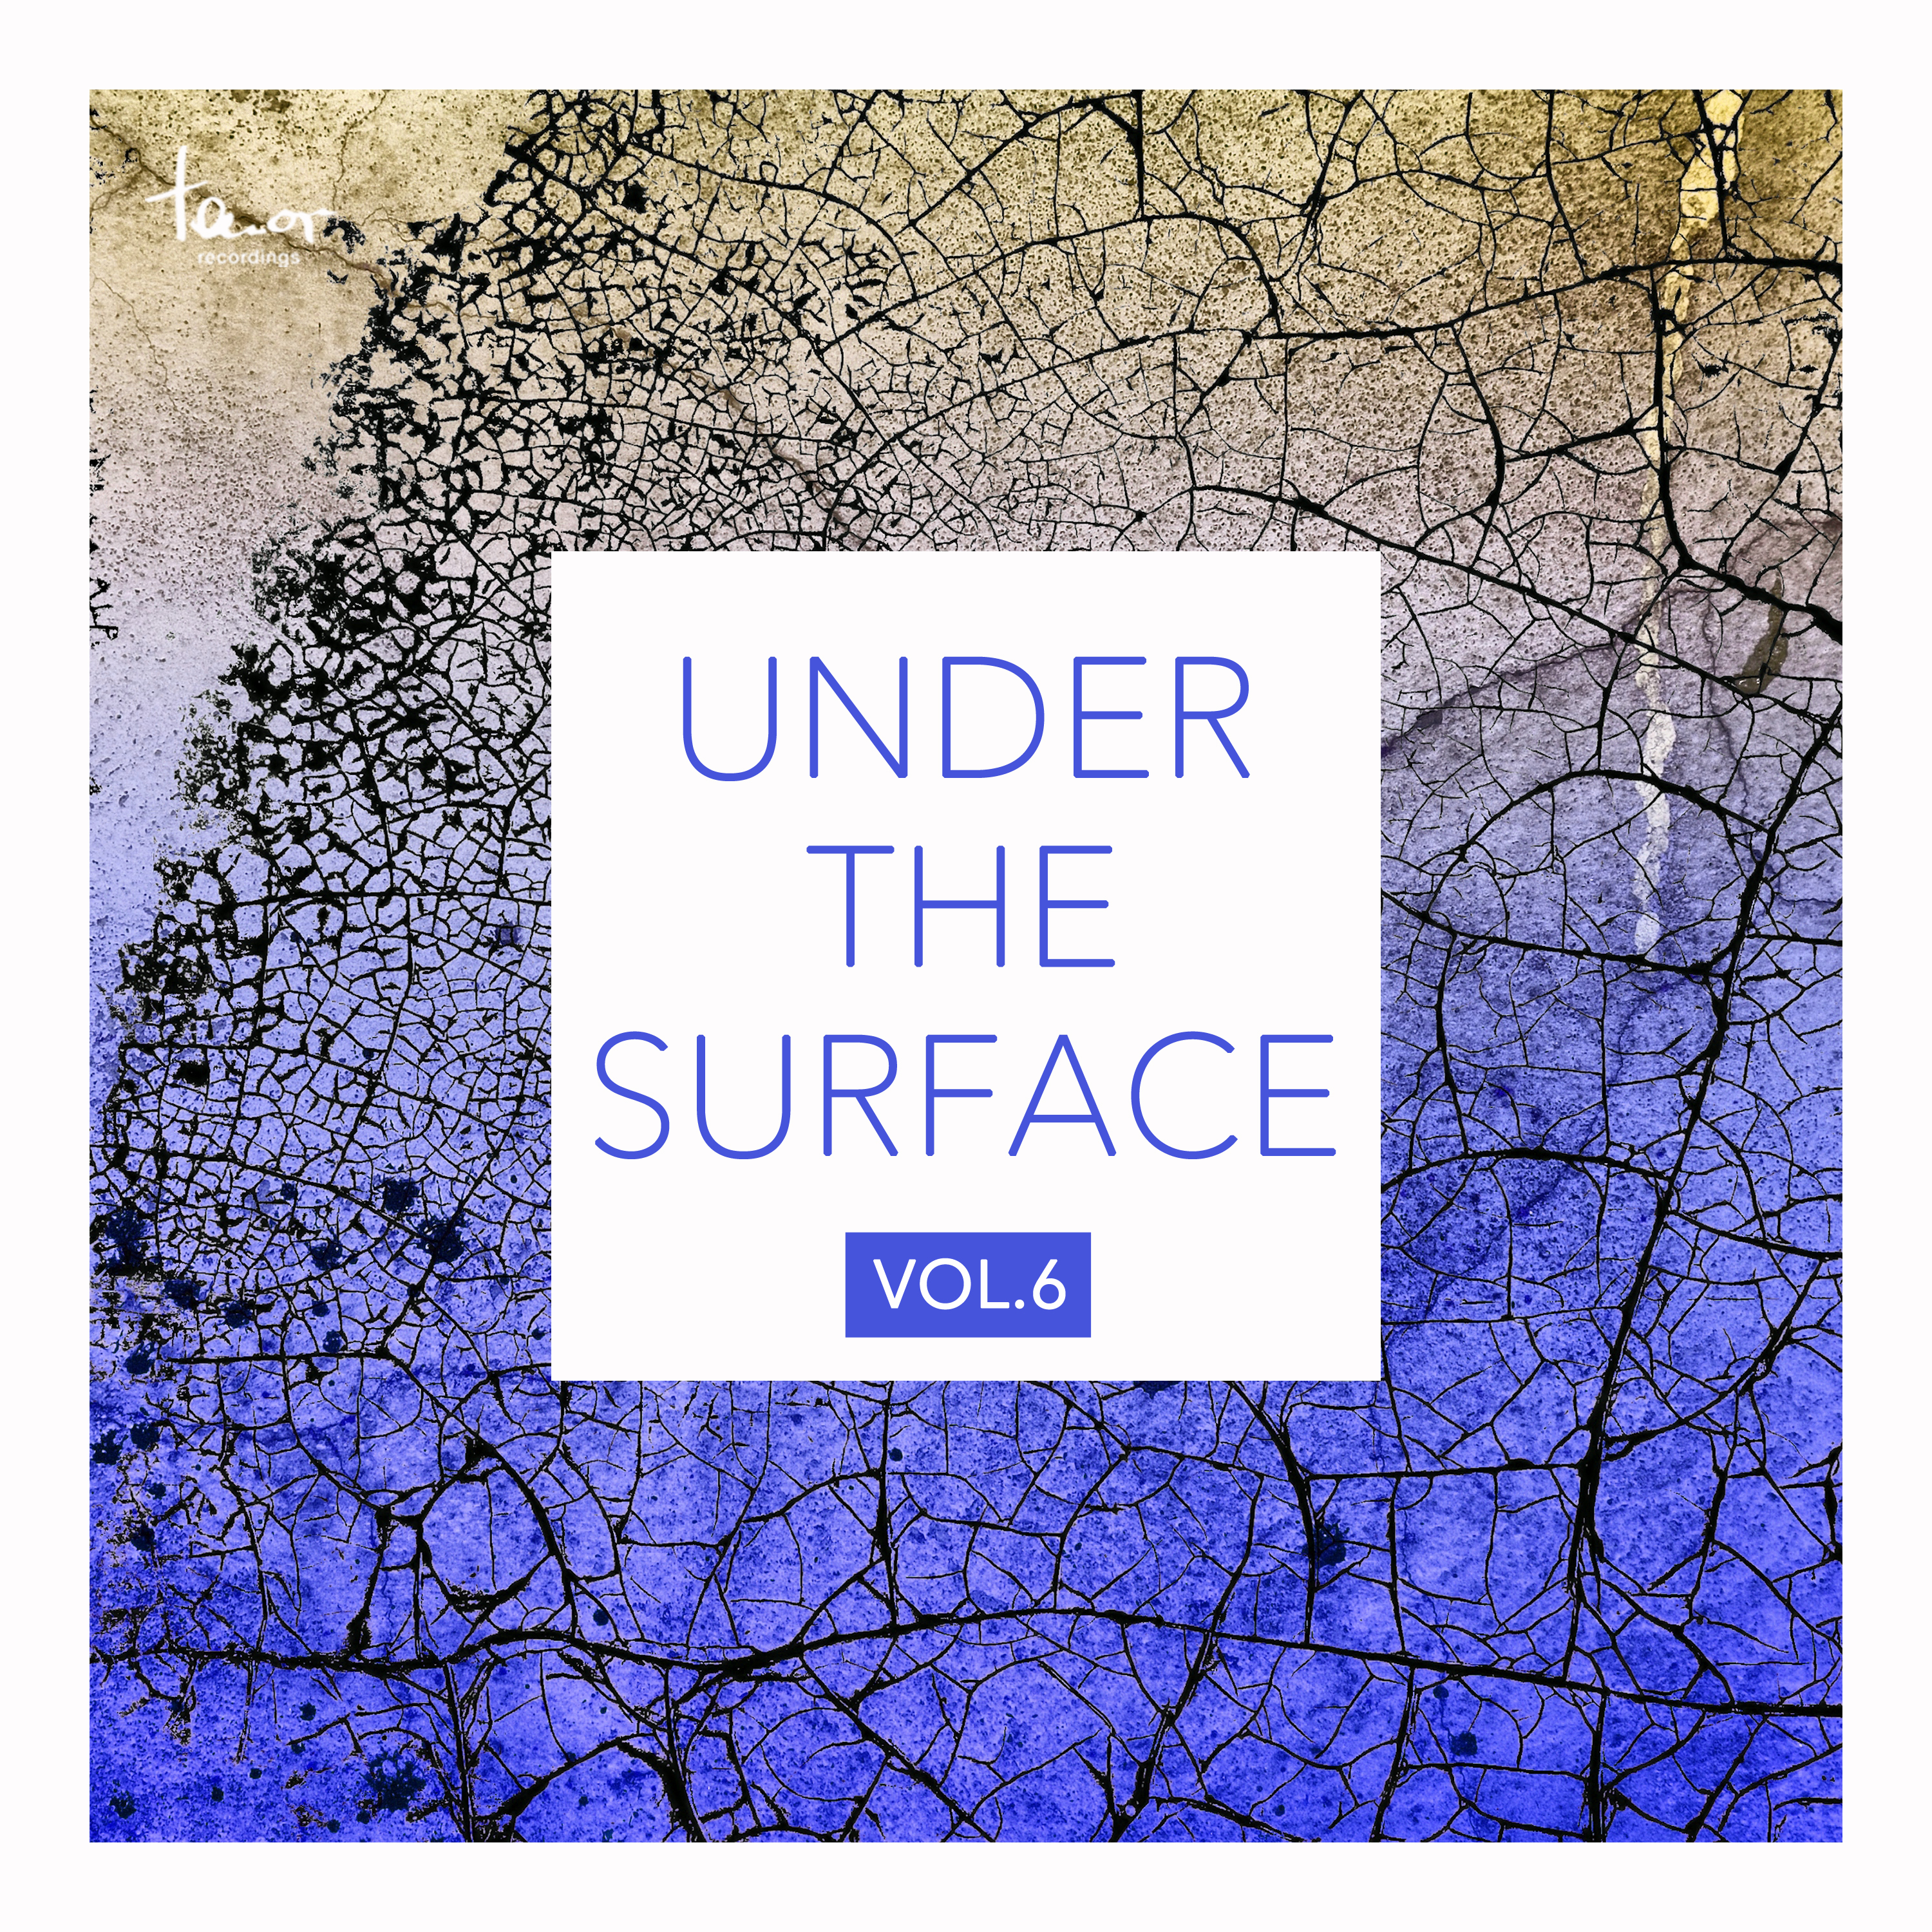 Under the Surface, Vol. 6